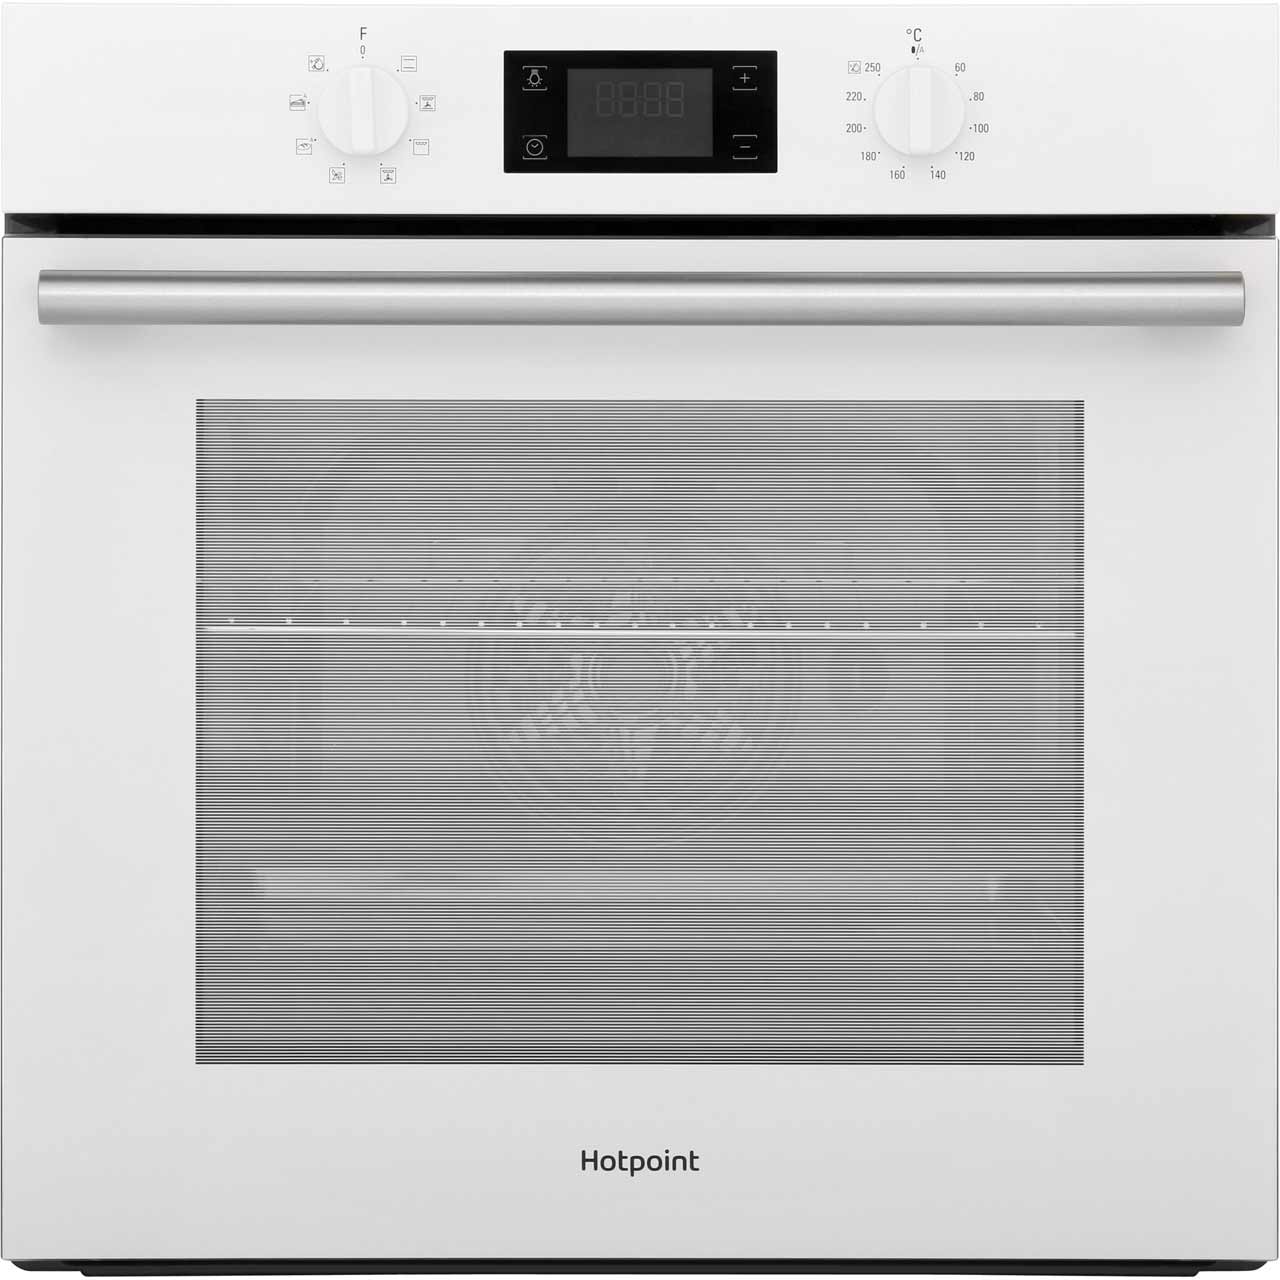 Hotpoint Class 2 SA2540HWH Integrated Single Oven in White